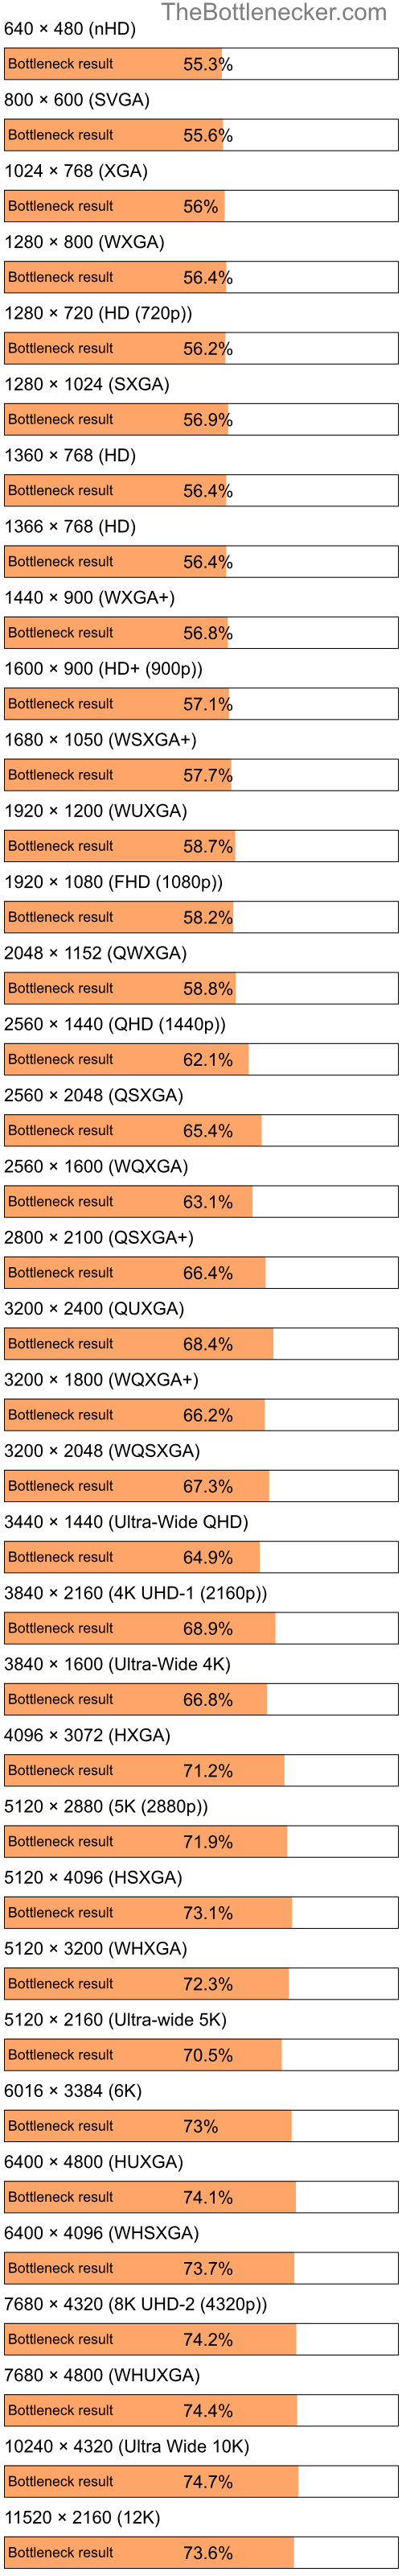 Bottleneck results by resolution for Intel Pentium 4 and NVIDIA GeForce 8600M GS in Processor Intense Tasks